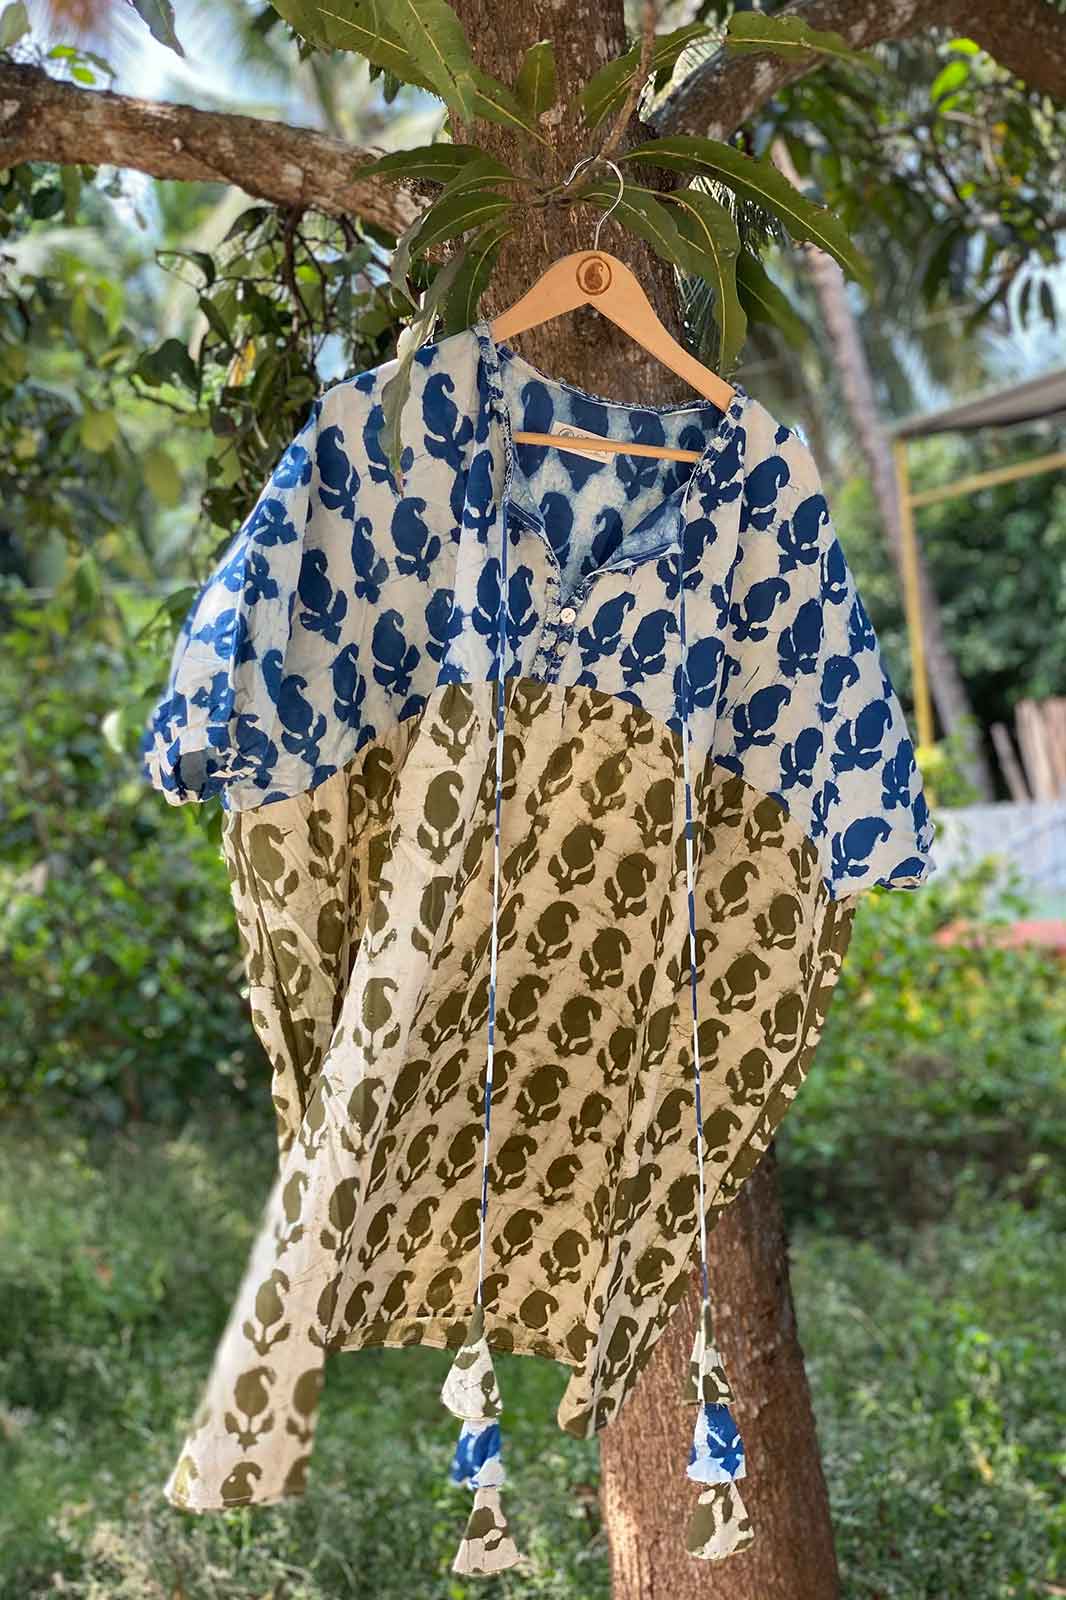 Sepia stories, Handmade products online, 100% Natural fashion accessories online, Best organic online store, Organic products India, Organic brands online, Natural handmade products, Fashion accessories online, Online store, Praful Makwana, Mister and Mister, Socially conscious brand, organic clothing, Indian handmade products, Indian designer brand, Indian accessories, Women tops online, shop organic handmade tops, handmade tops for women, shop women tops online, designer tops, Indian handmade tops, fashionable tops, Women tops, organic tops, tops for women, designer women tops, handmade women tops, organic handmade clothing, handmade organic clothing, natural fabrics, handcrafted clothing in India, organic fabrics, eco-friendly clothing brands, organic clothing range, sustainable clothing